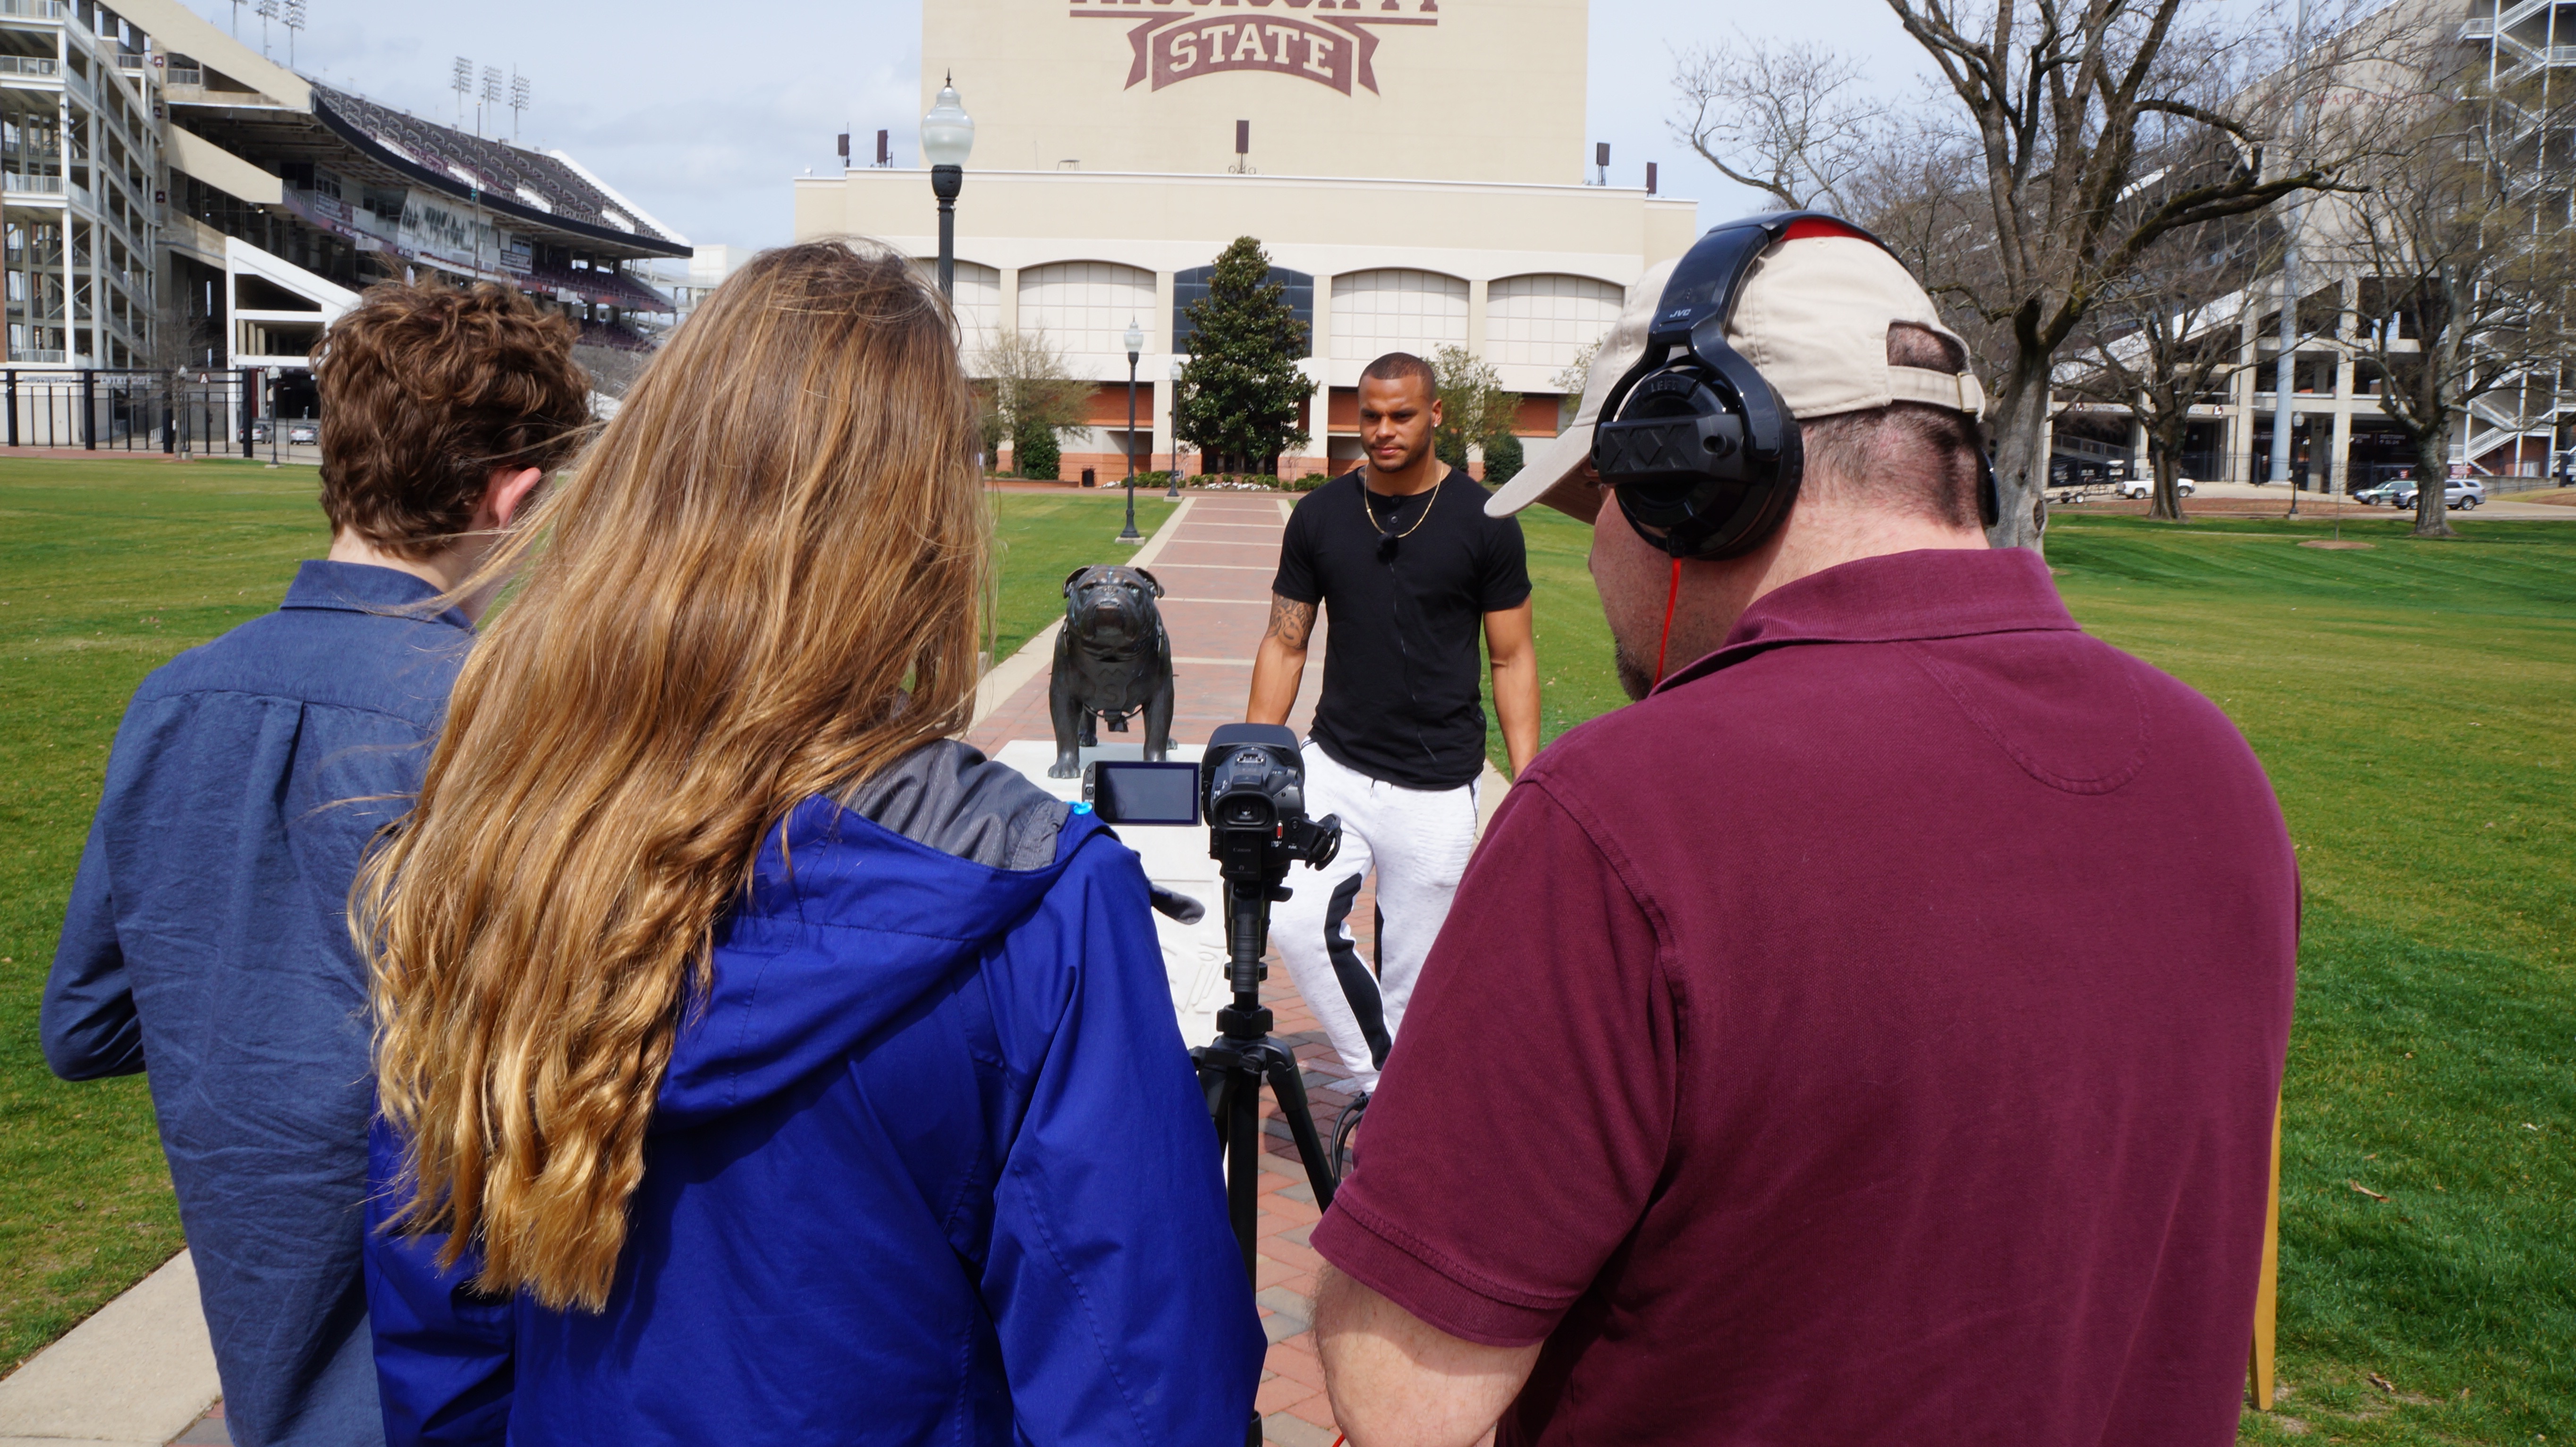 Three students, carrying video recording equipment, interview a young athlete on the campus of a college.